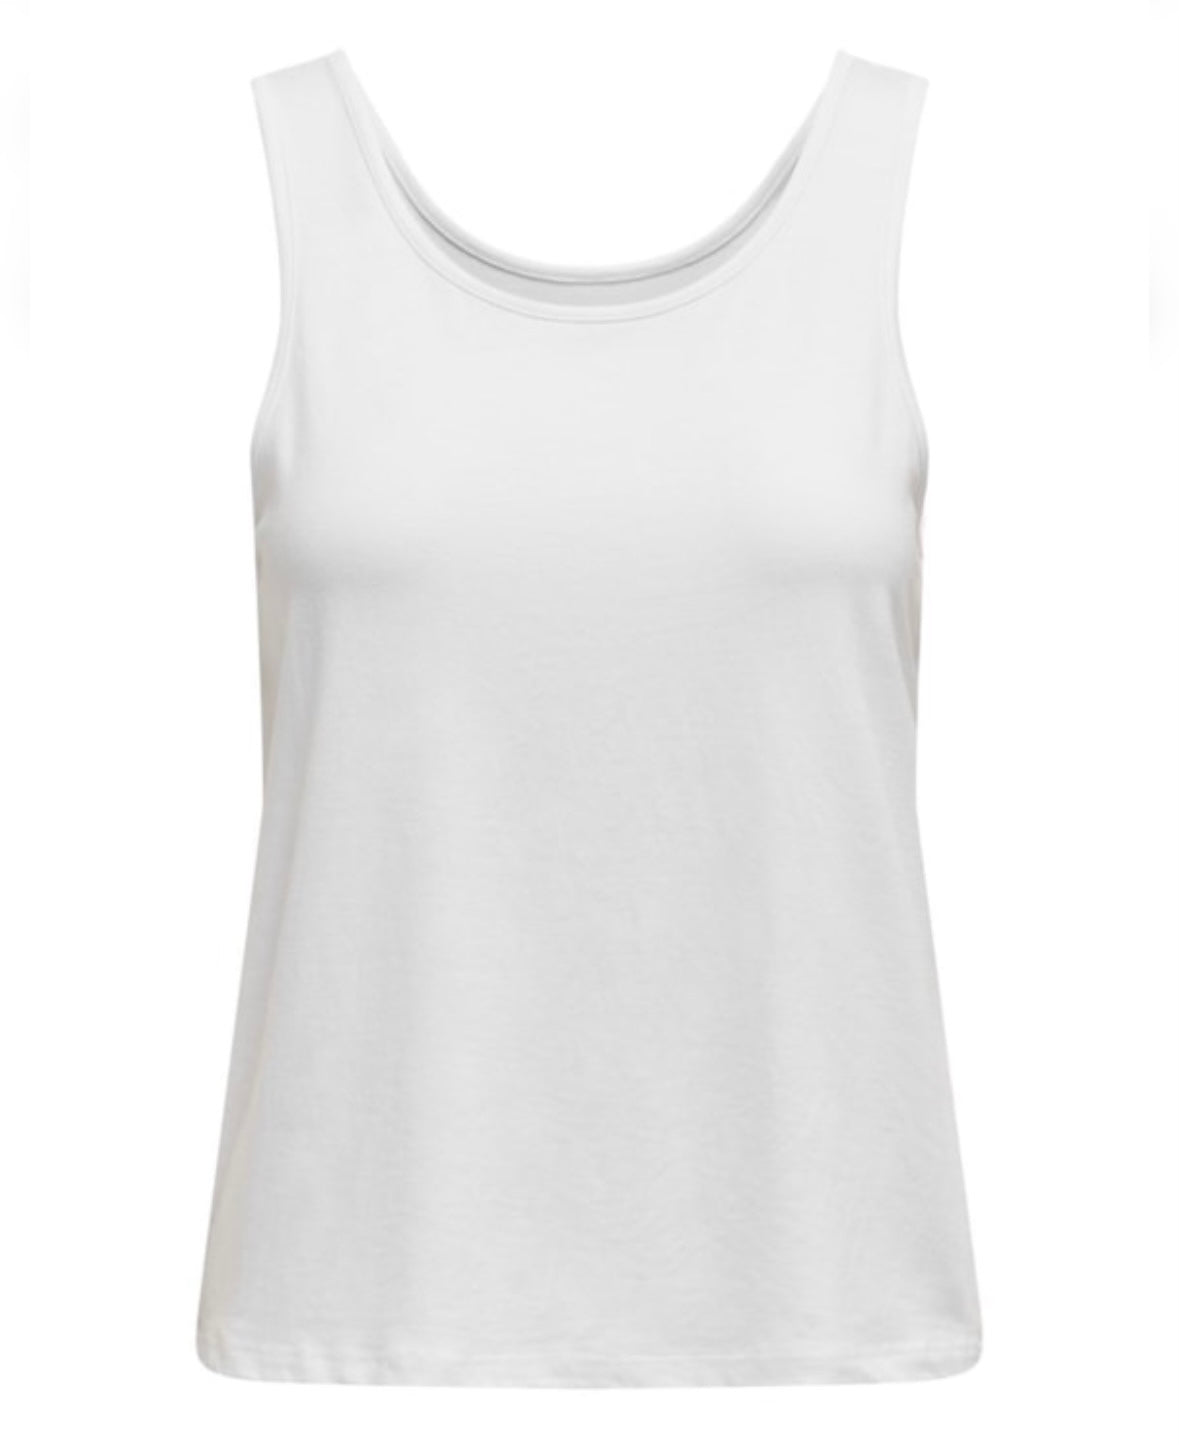 ONLY - MOSTER S/L TANK TOP - WHITE